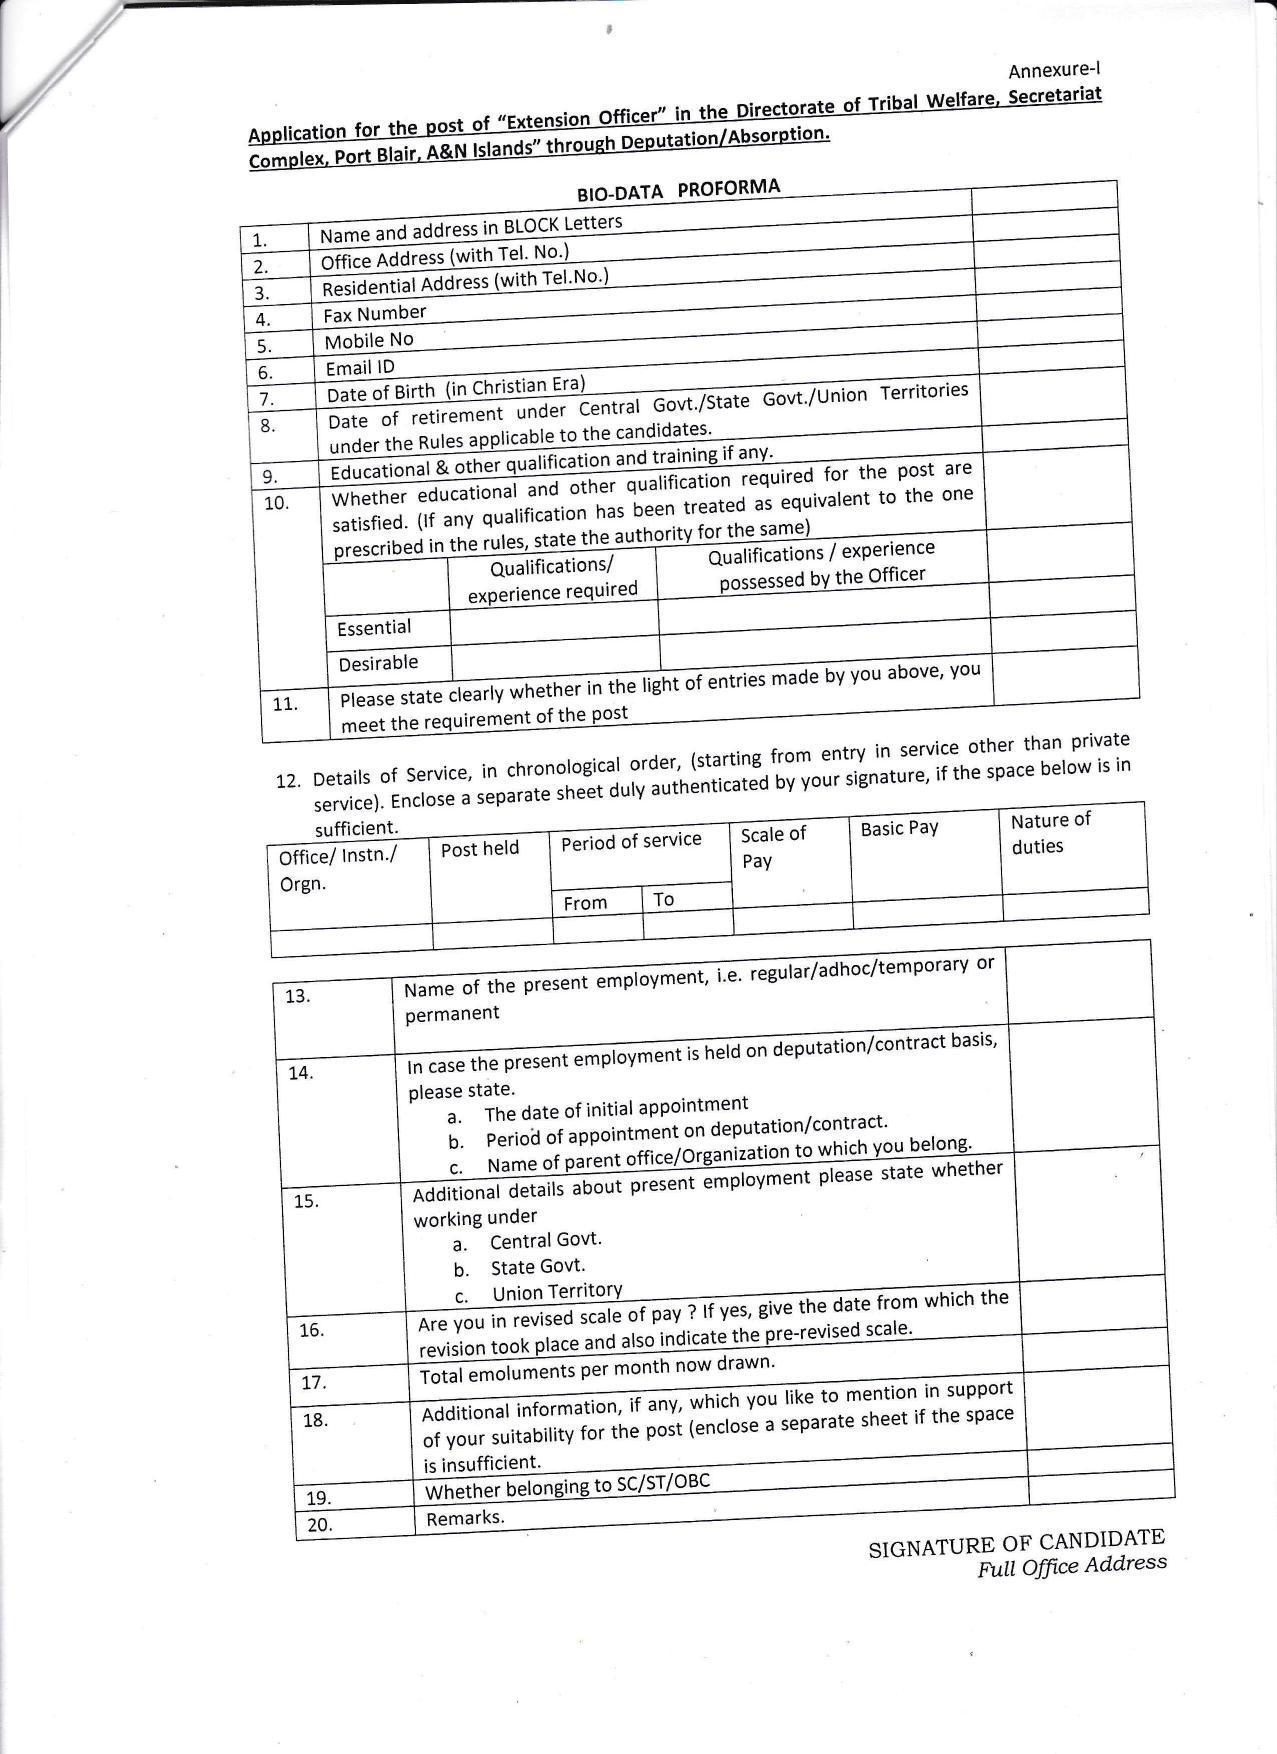 Andaman & Nicobar Administration Invites Application for Extension Officer Recruitment 2022 - Page 5